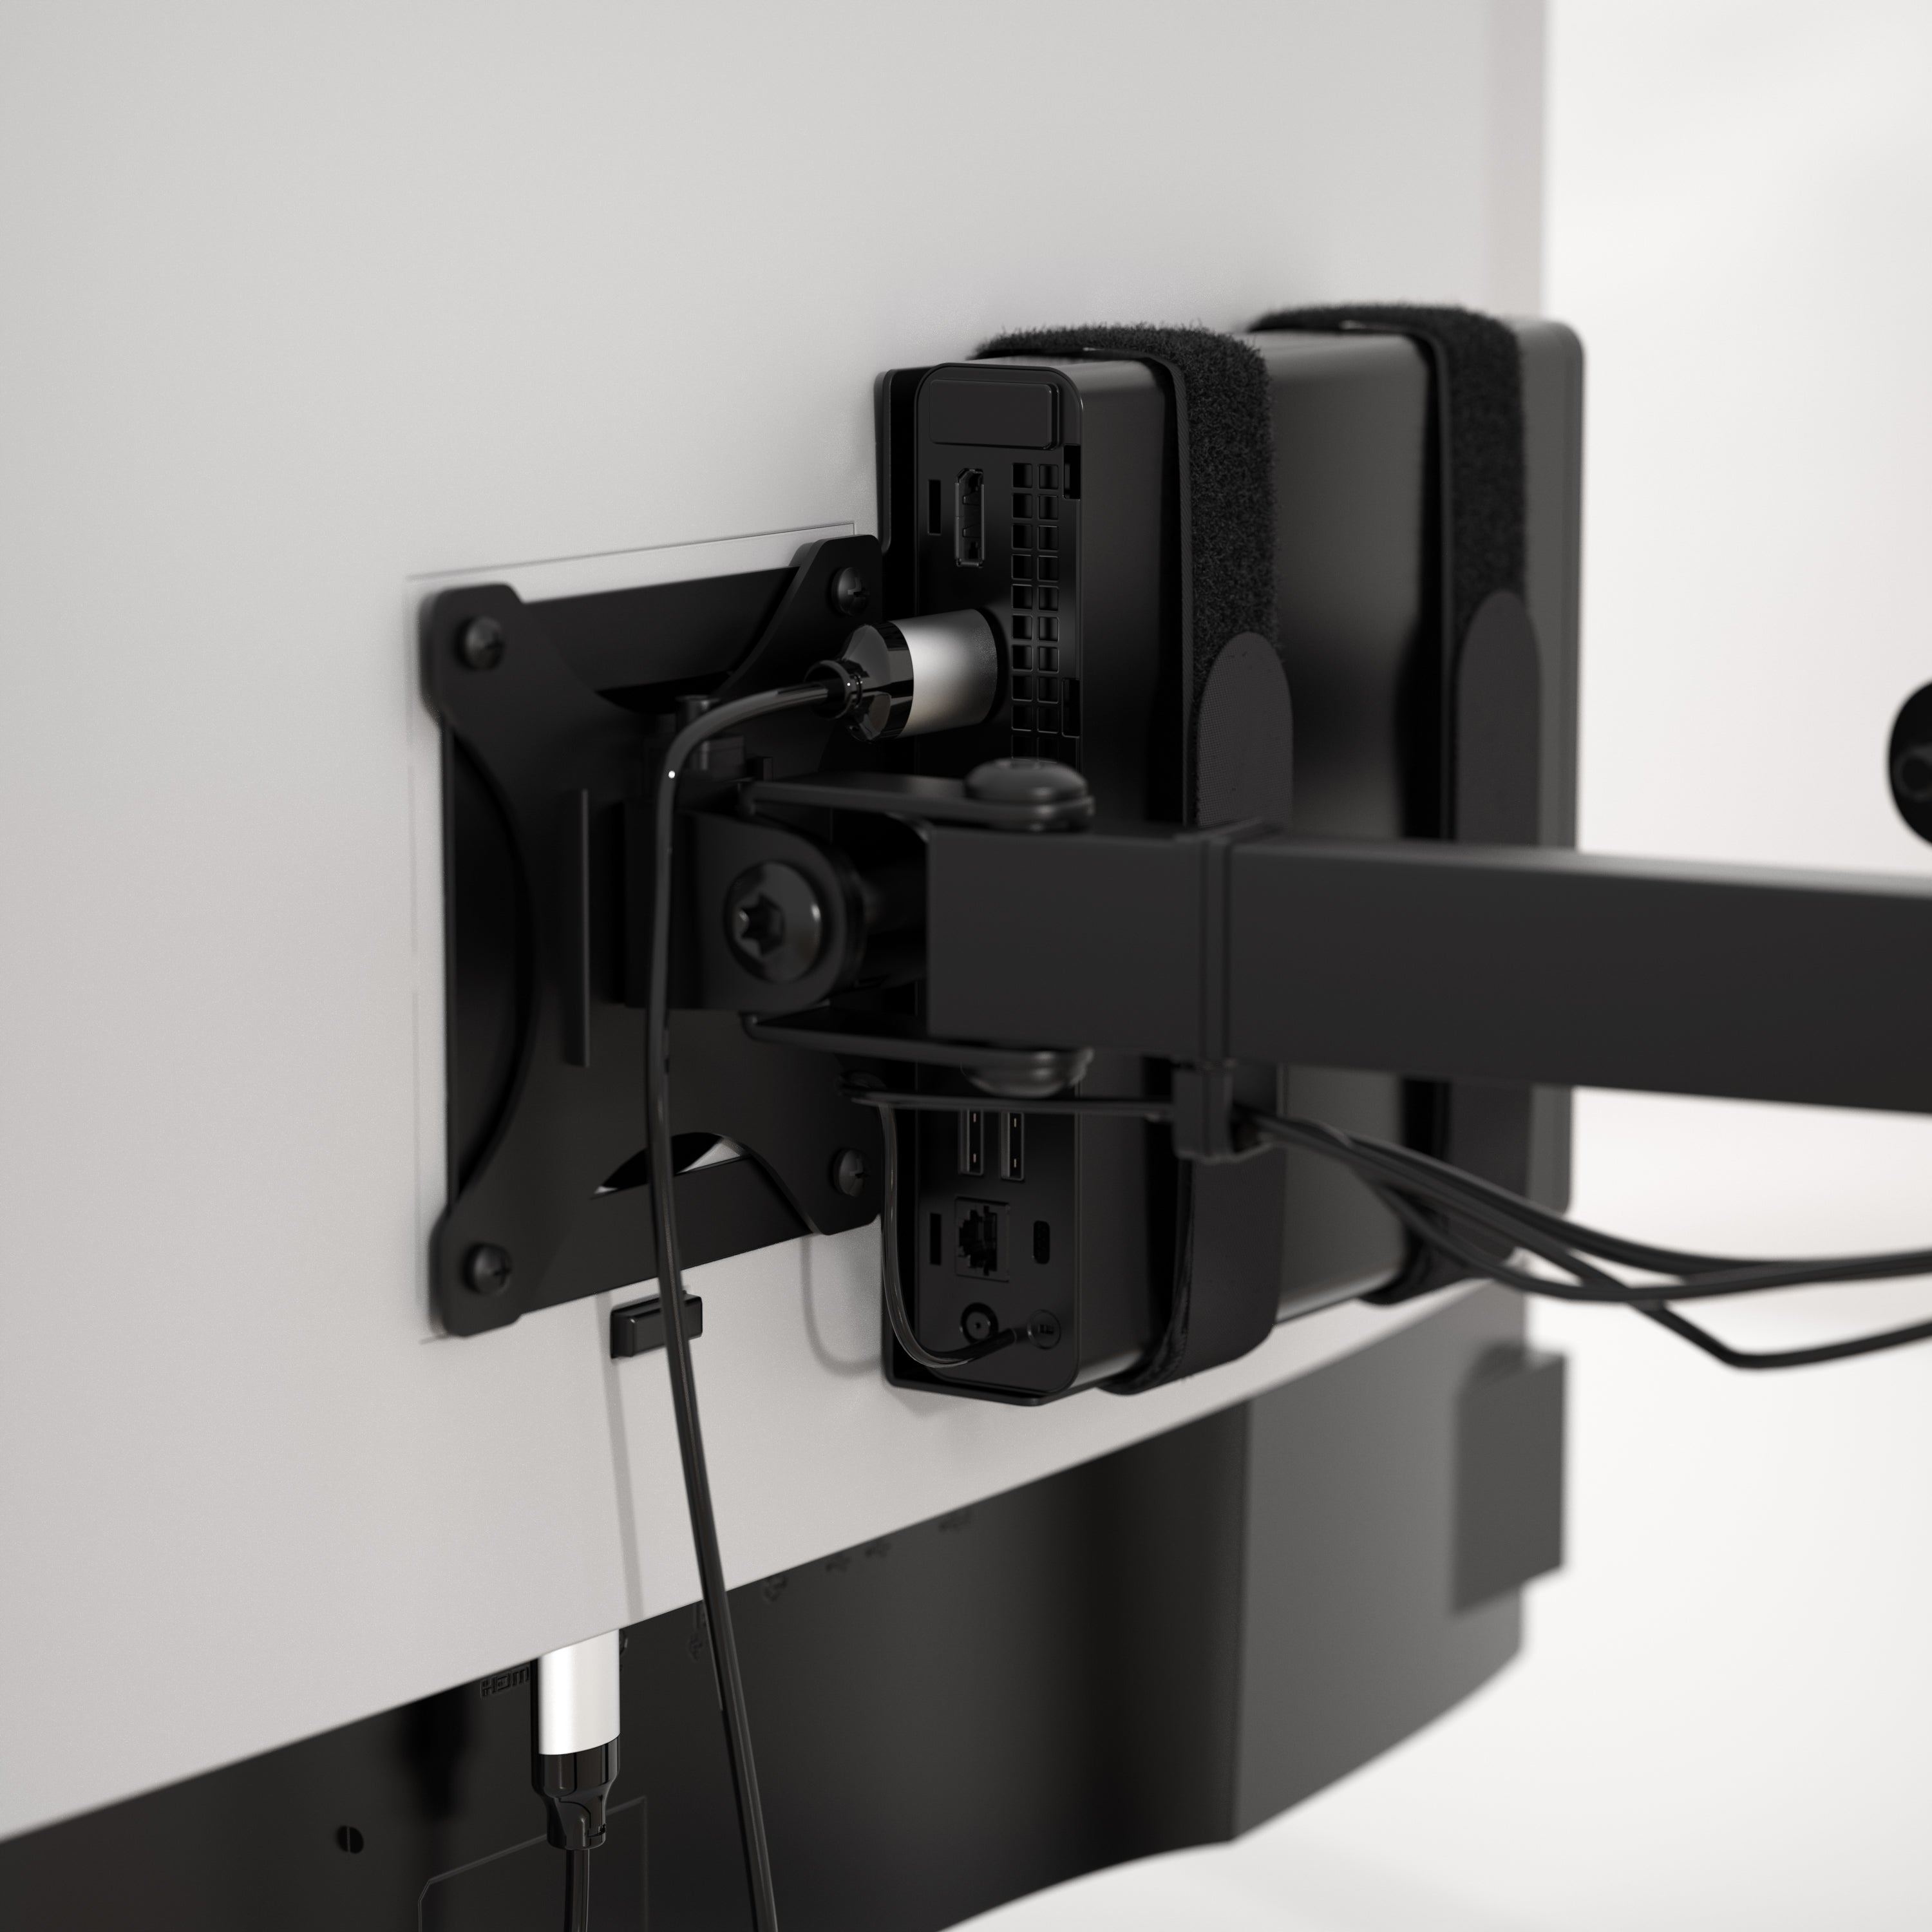 HumanCentric Universal Wall and VESA Mount for VESA Arm, Adjustable Strap Mount for Small Computers, Cable Boxes, Modems and Other Electronic Devices